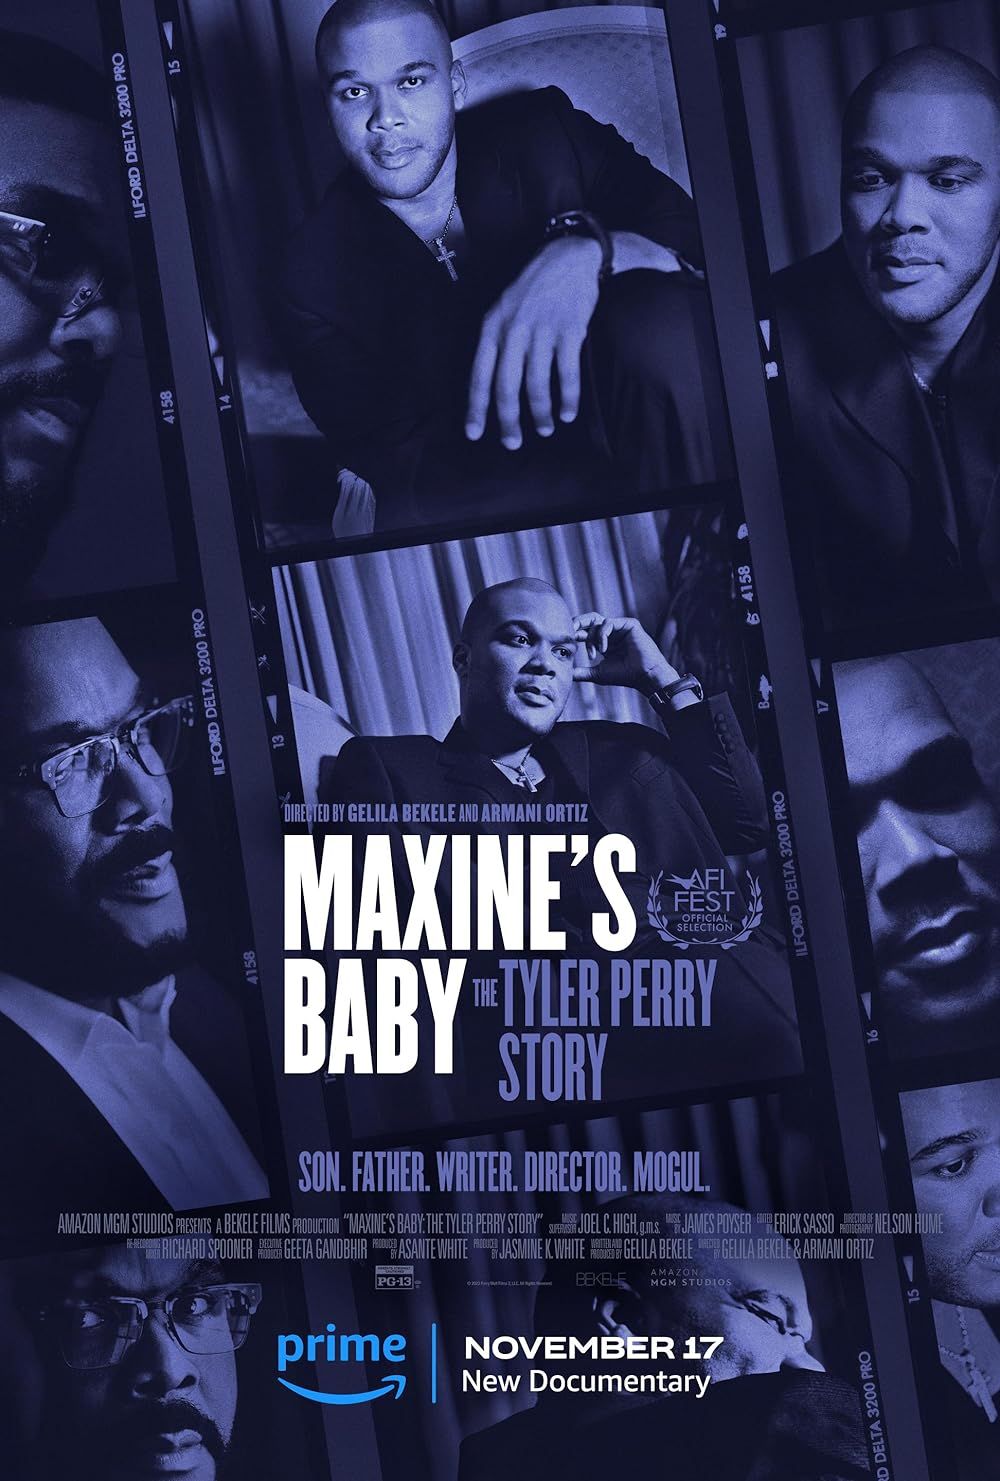 Maxine's Baby The Tyler Perry Story poster